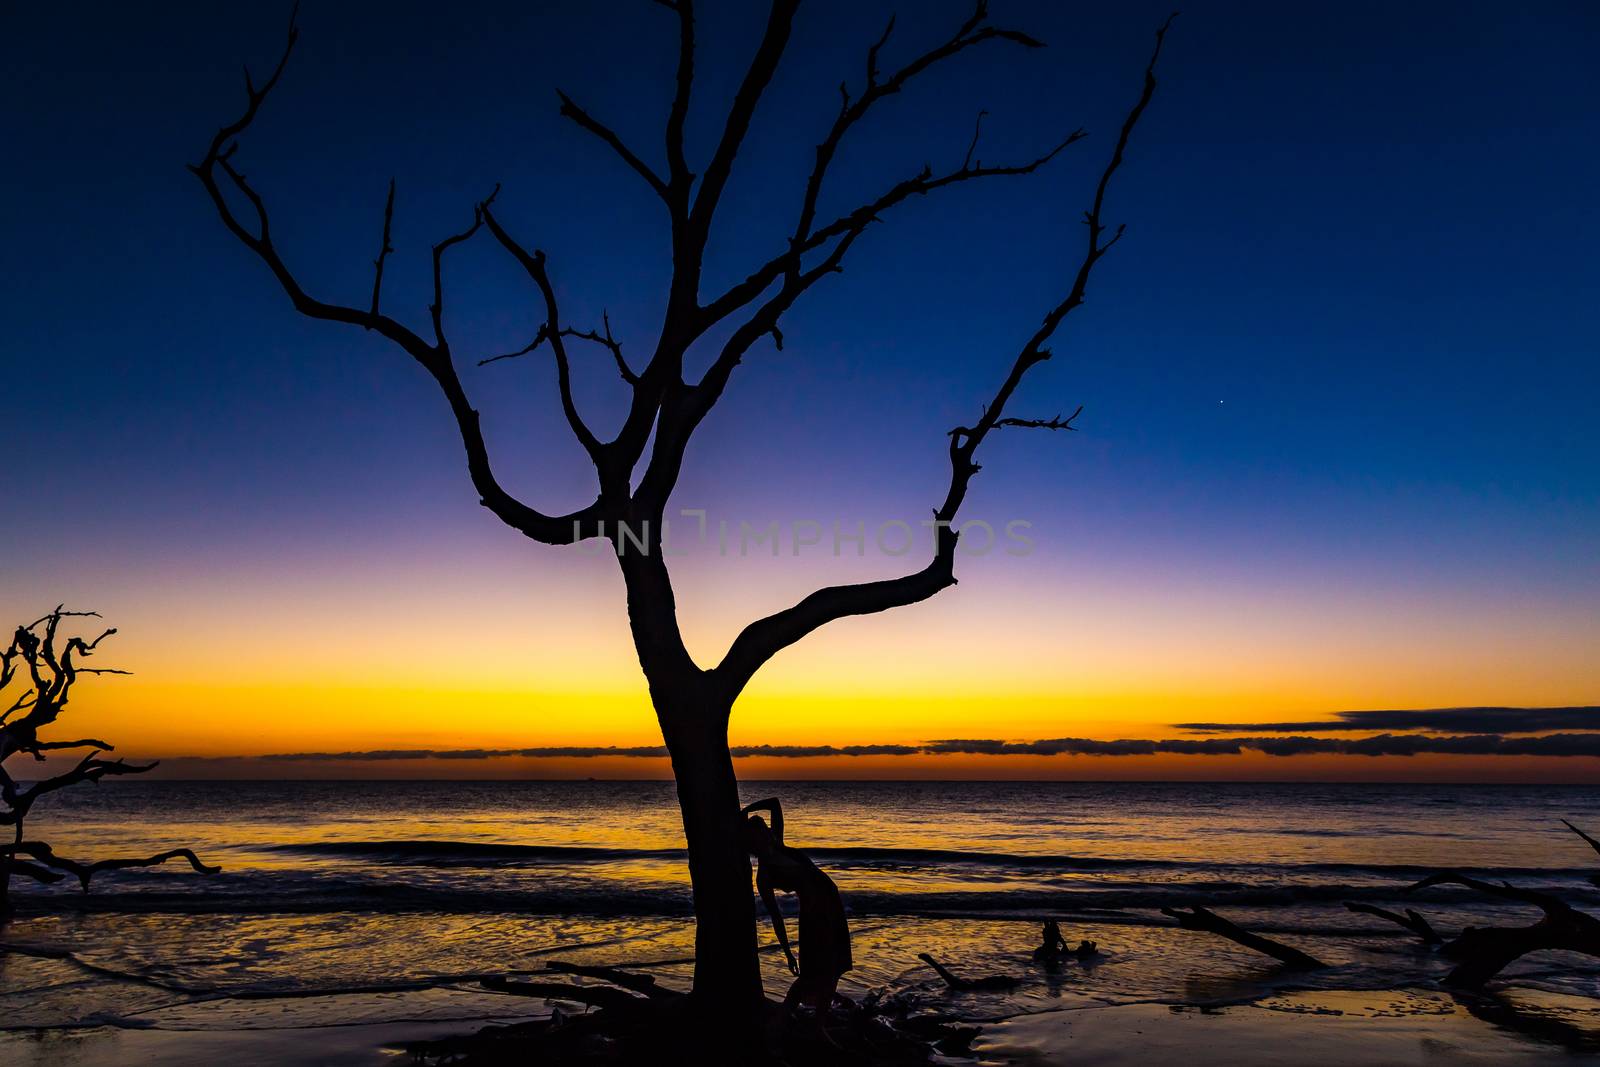 A young woman leans against a tree while waiting for the sun to rise over the ocean.